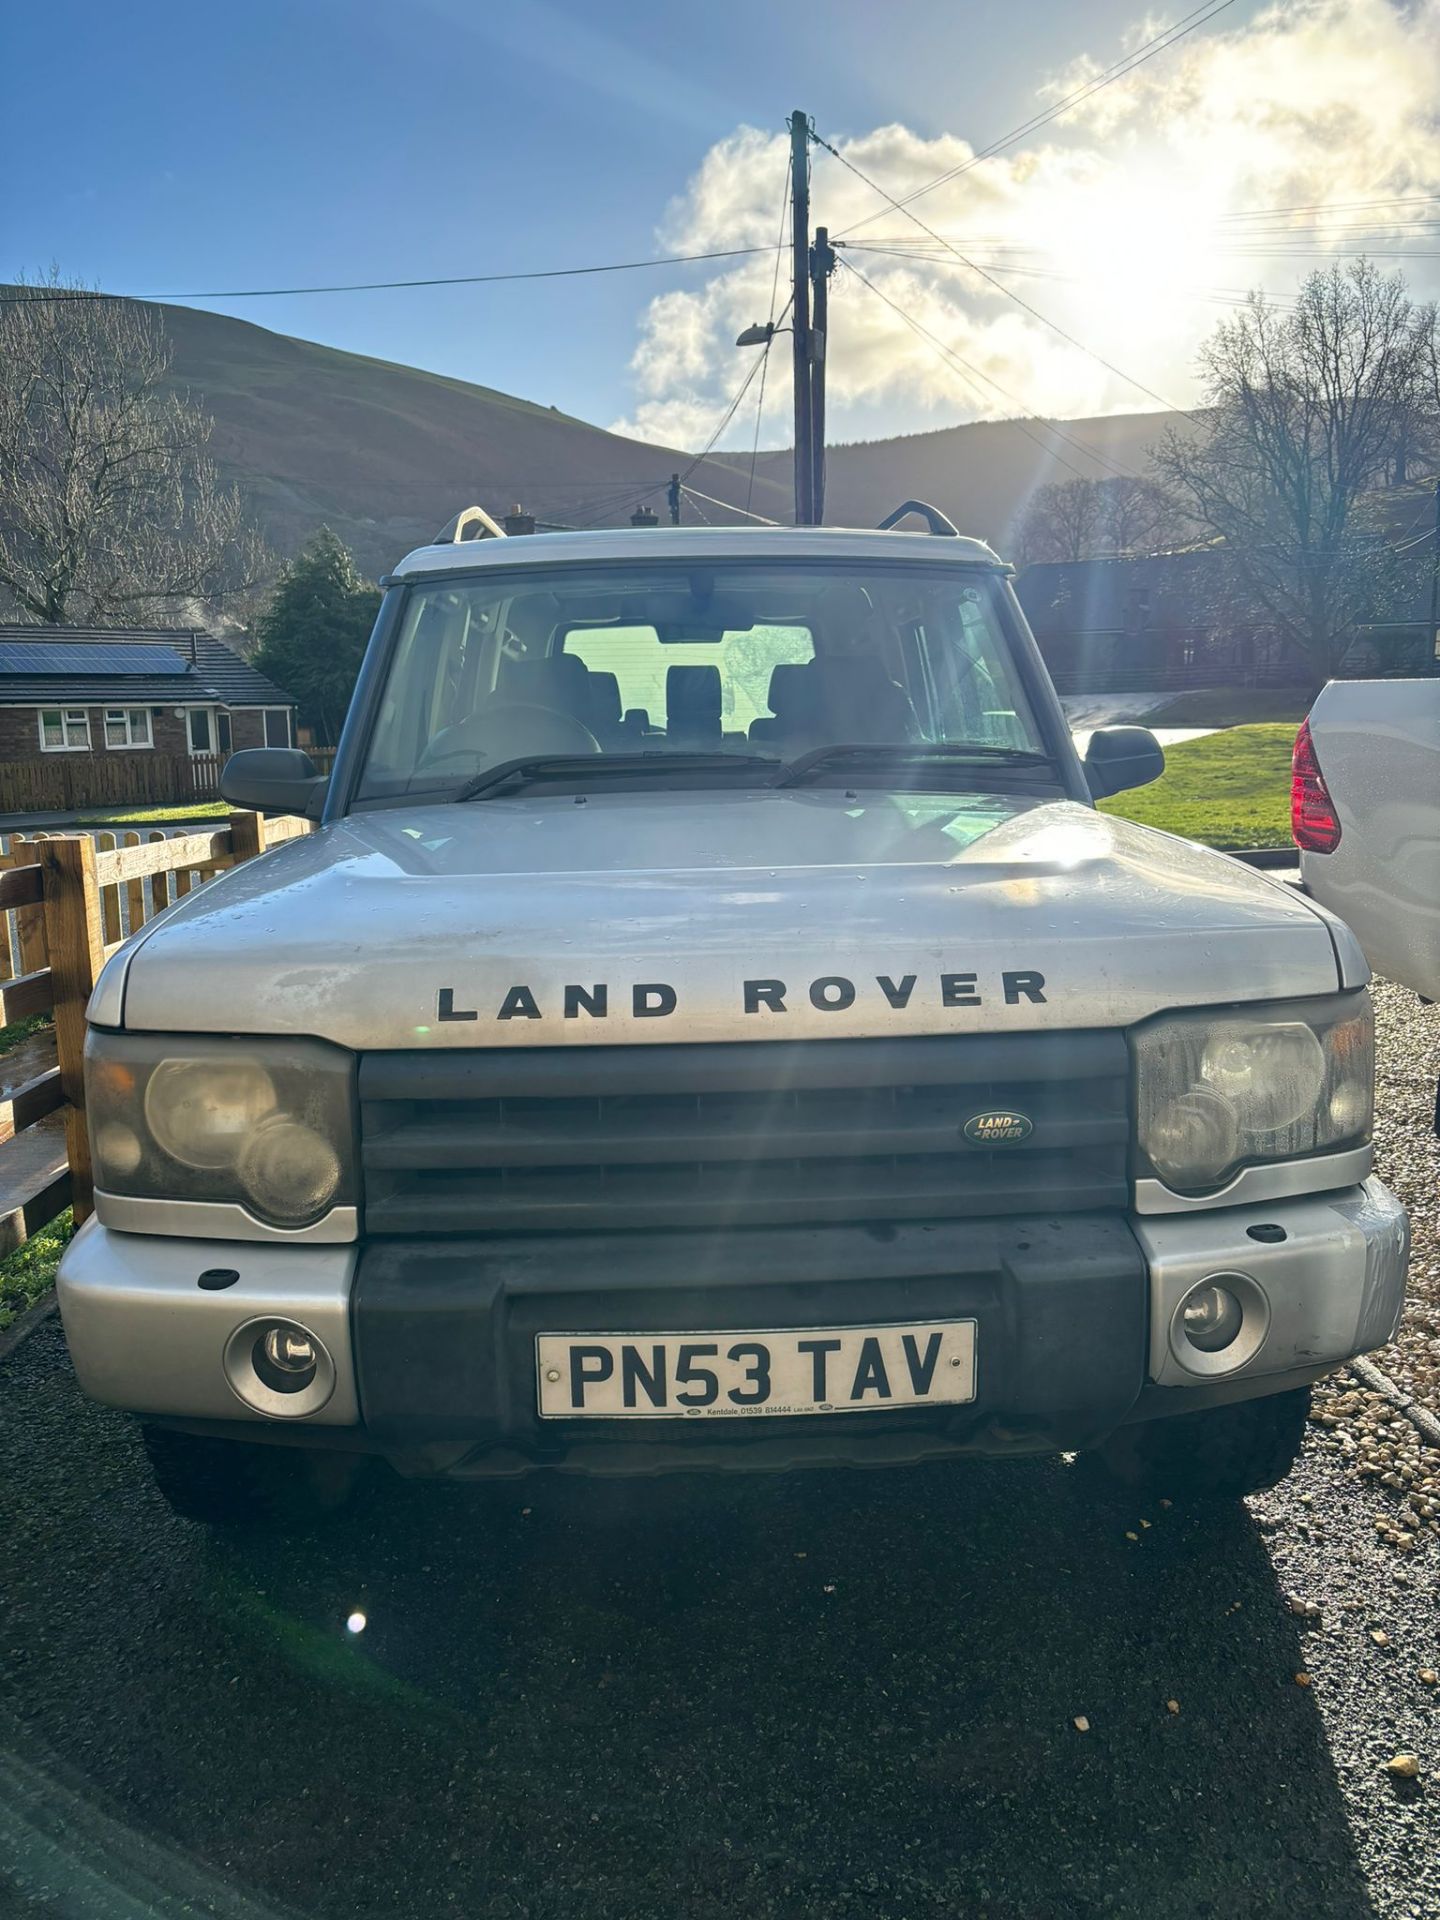 LAND ROVER DISCOVERY TD5 JEEP 4X4 - Image 6 of 10